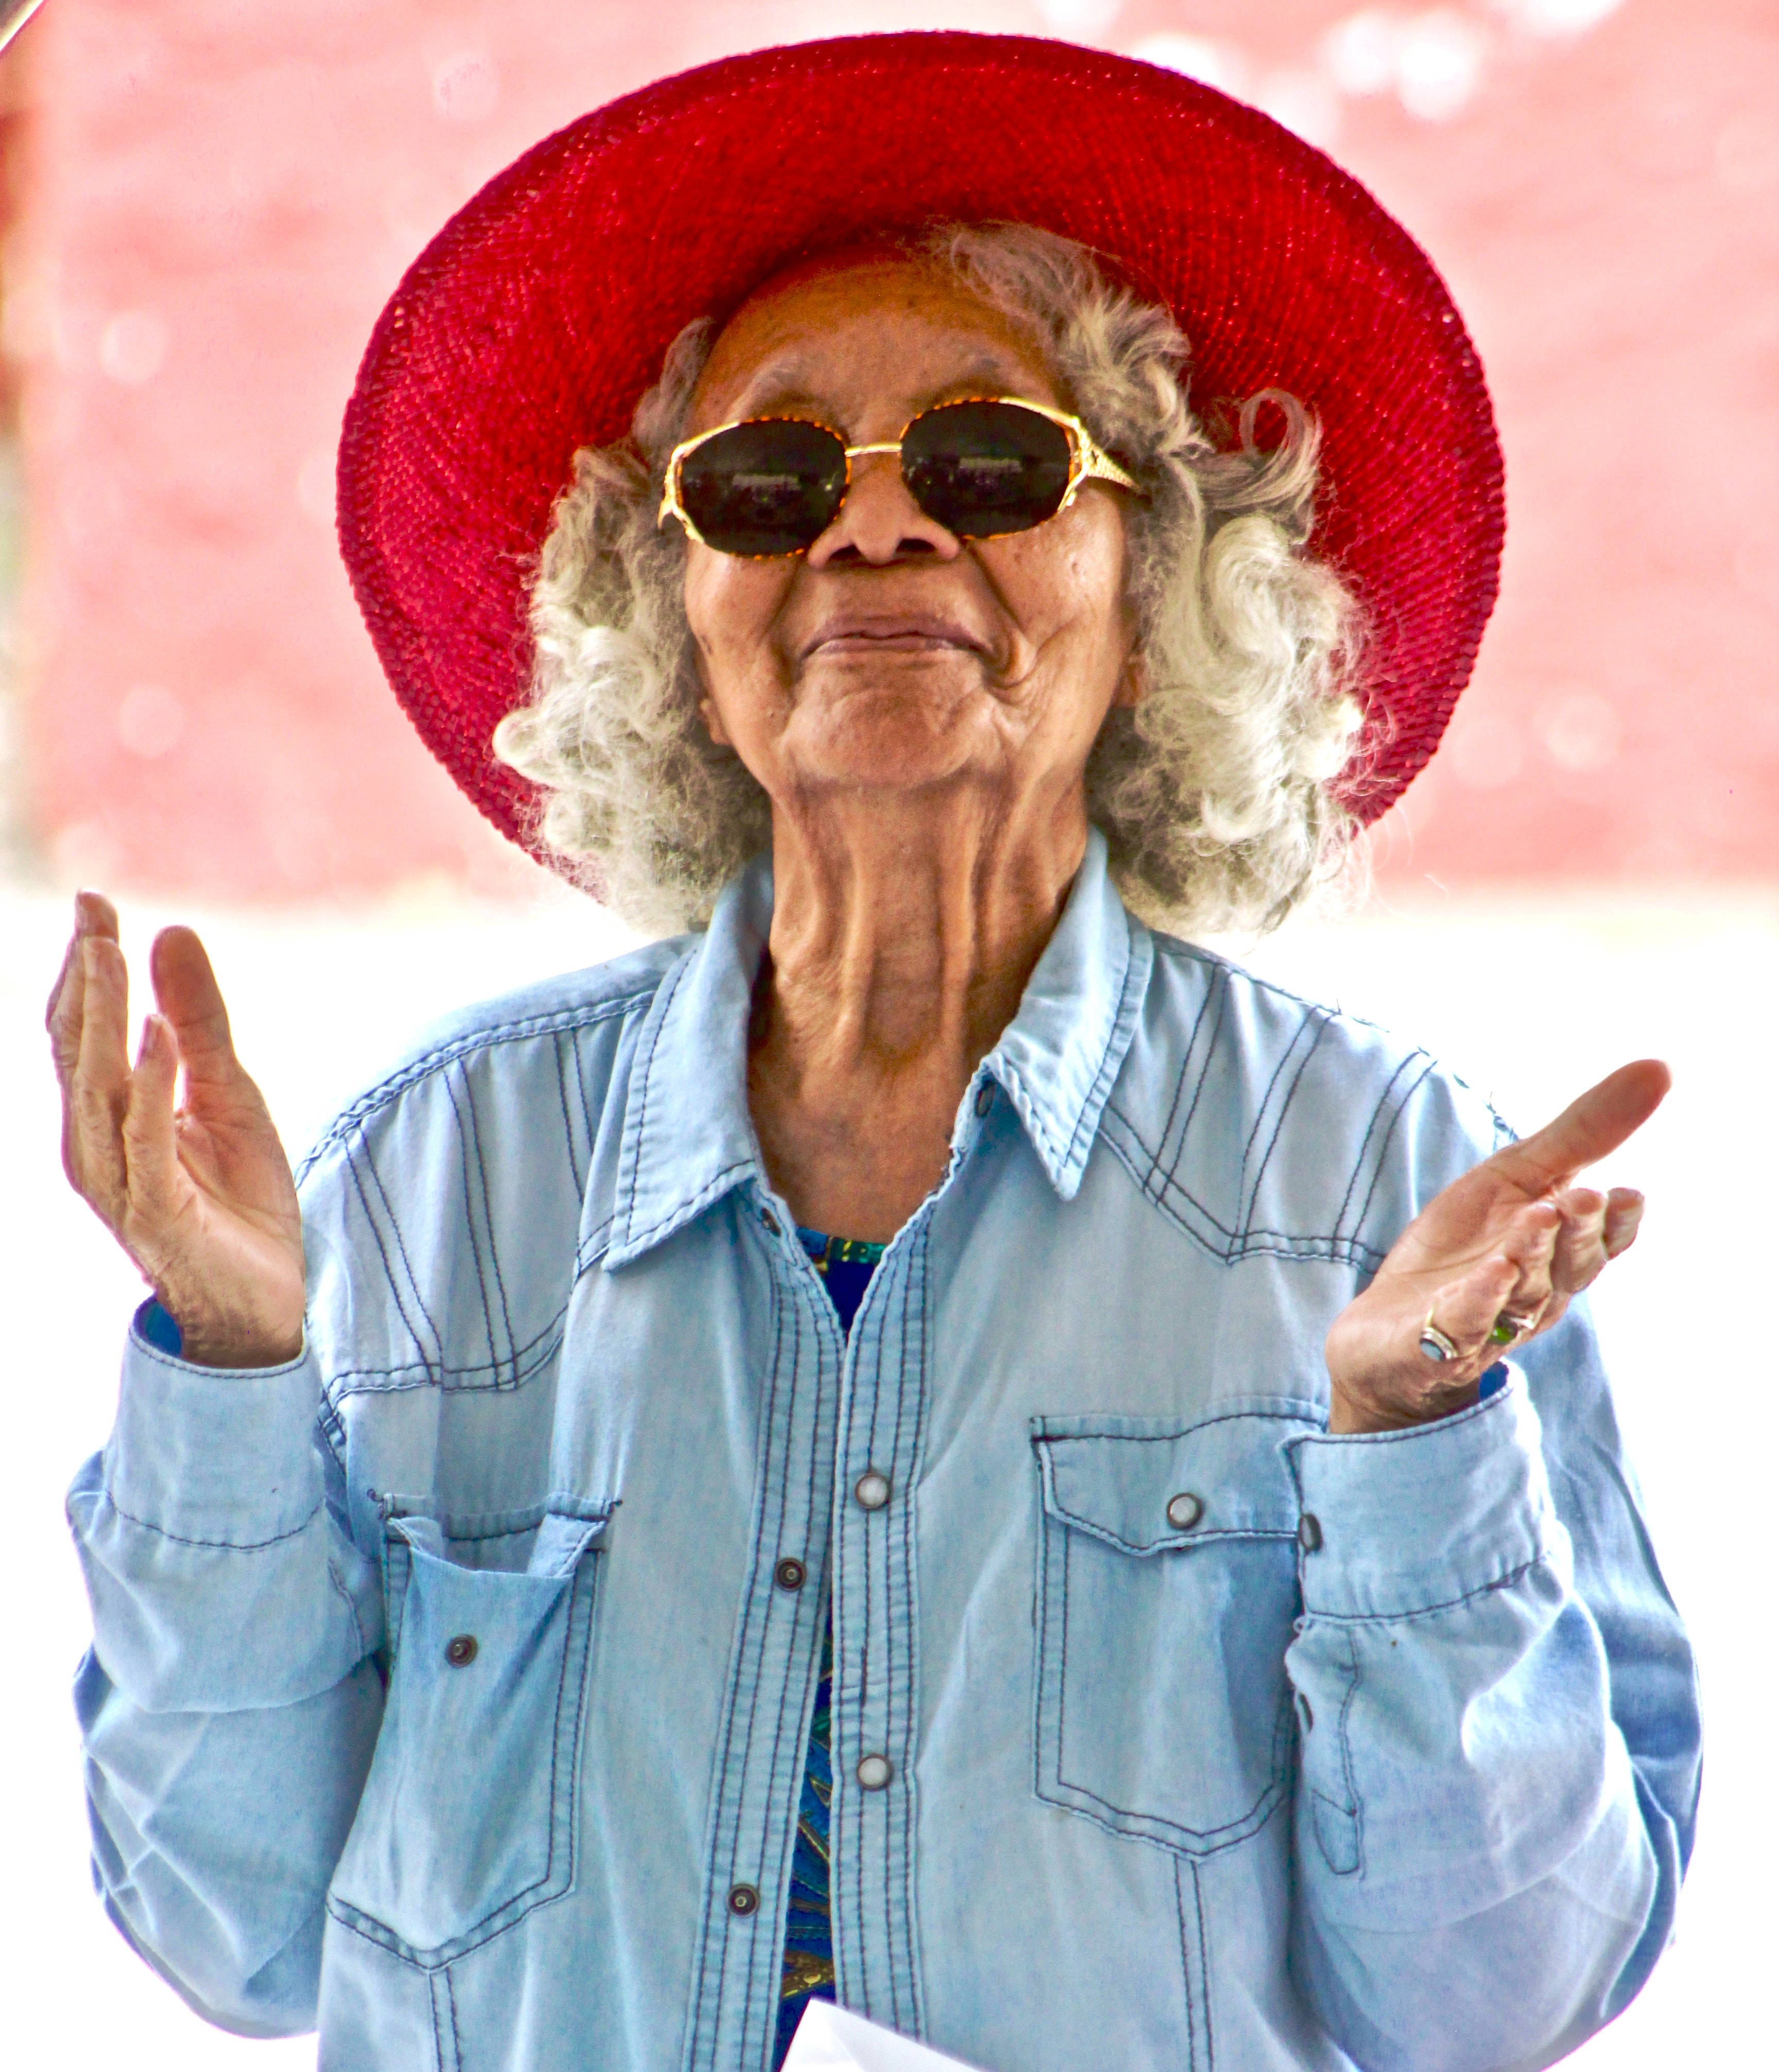 Senior woman smiling, wearing a red, wide brimmed sun hat, sunglasses, and denim shirt. 